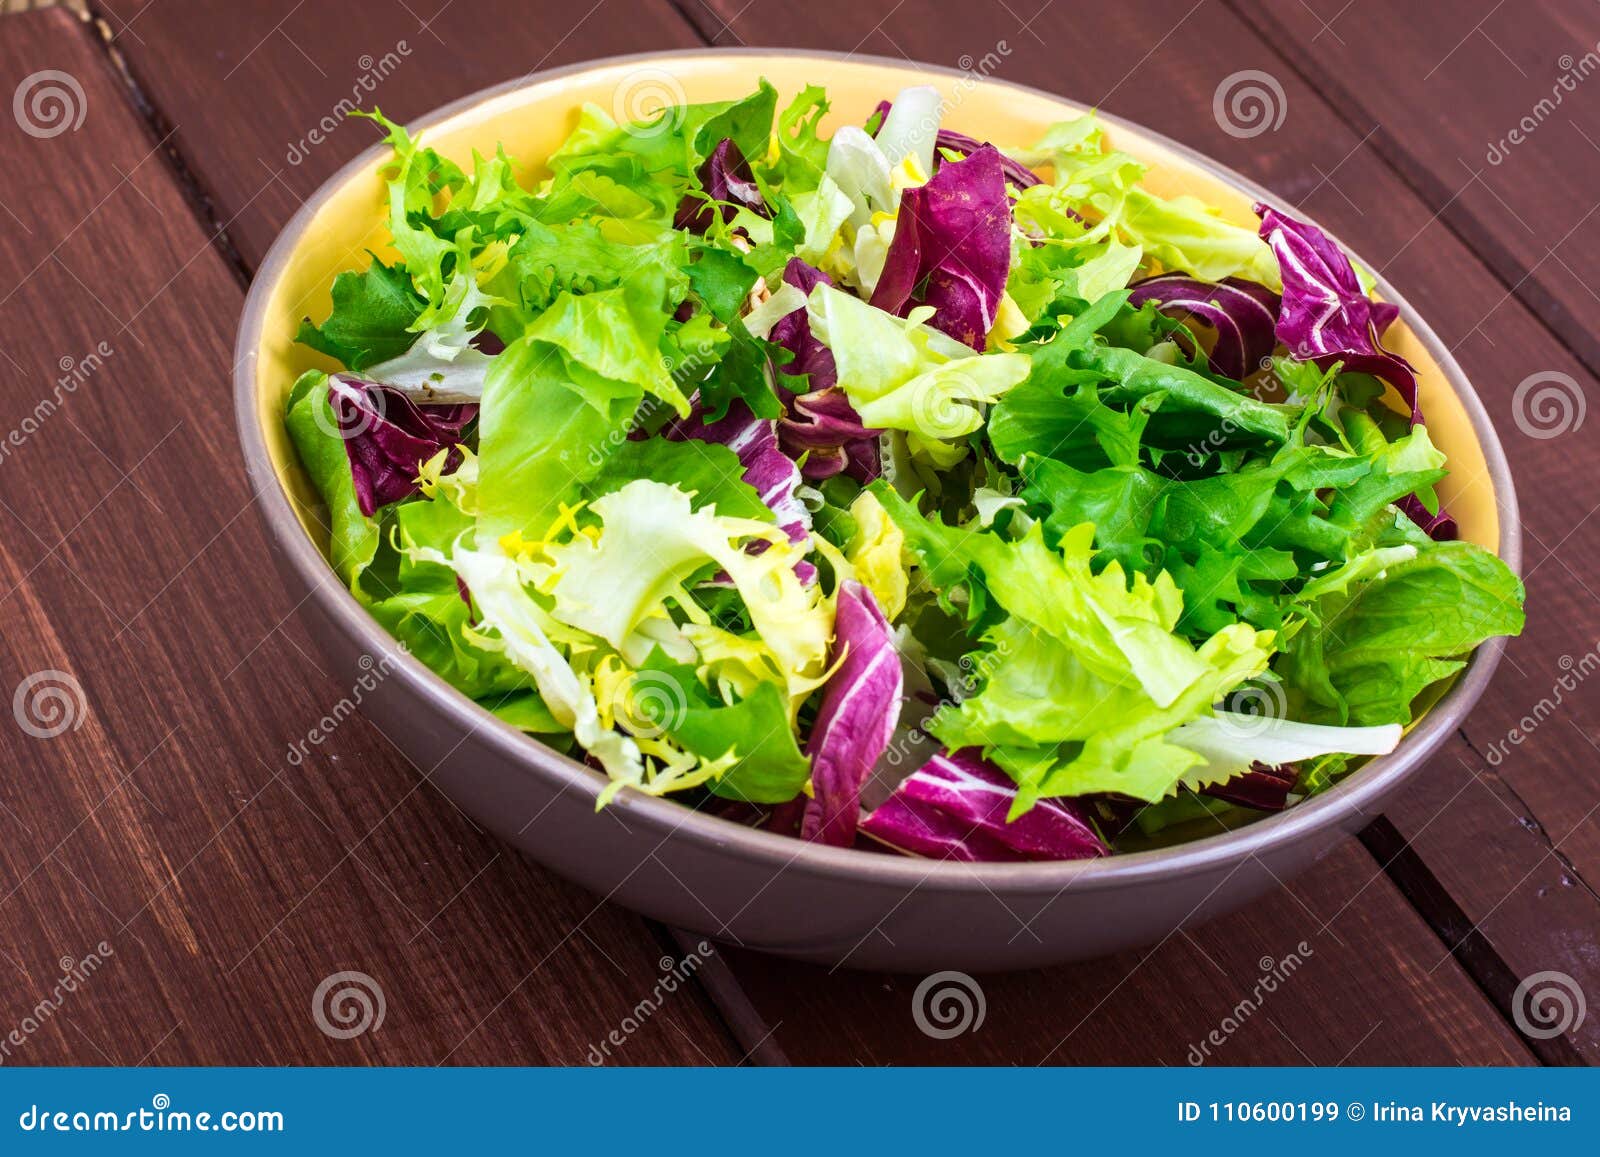 concept of vegetarian diet. fresh leaves of different salads